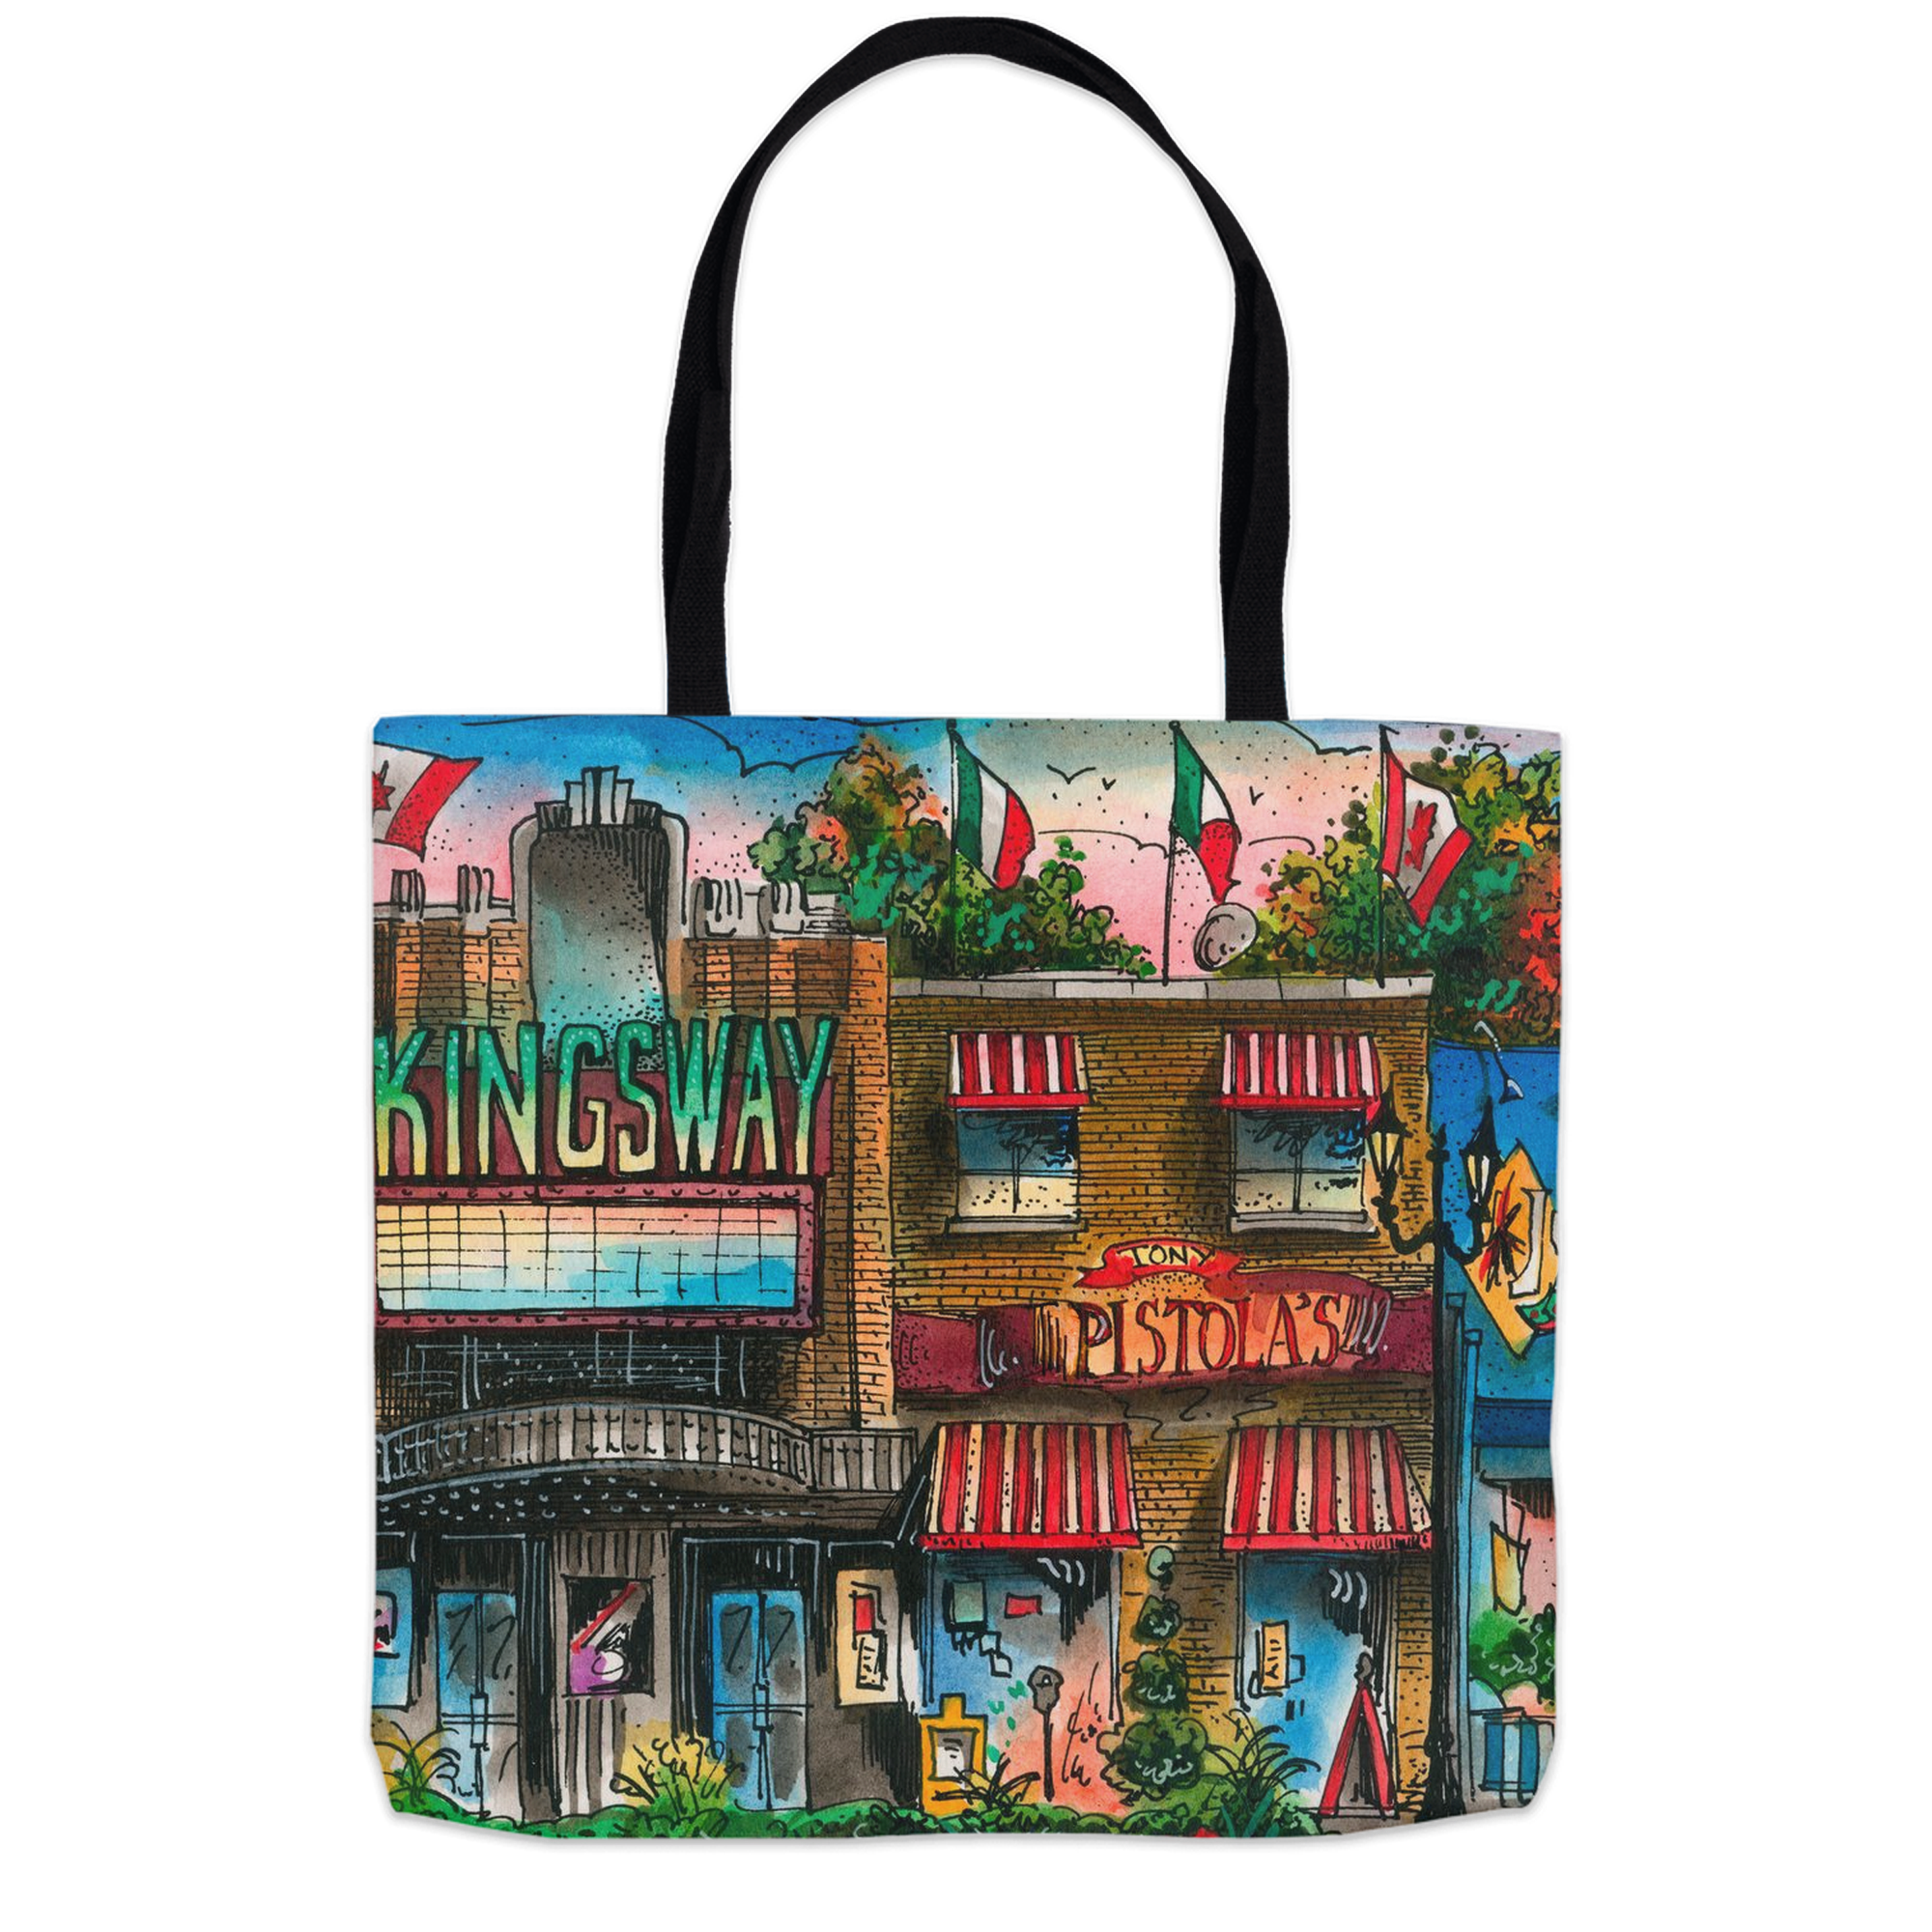 The Kingsway Canvas Tote Bag